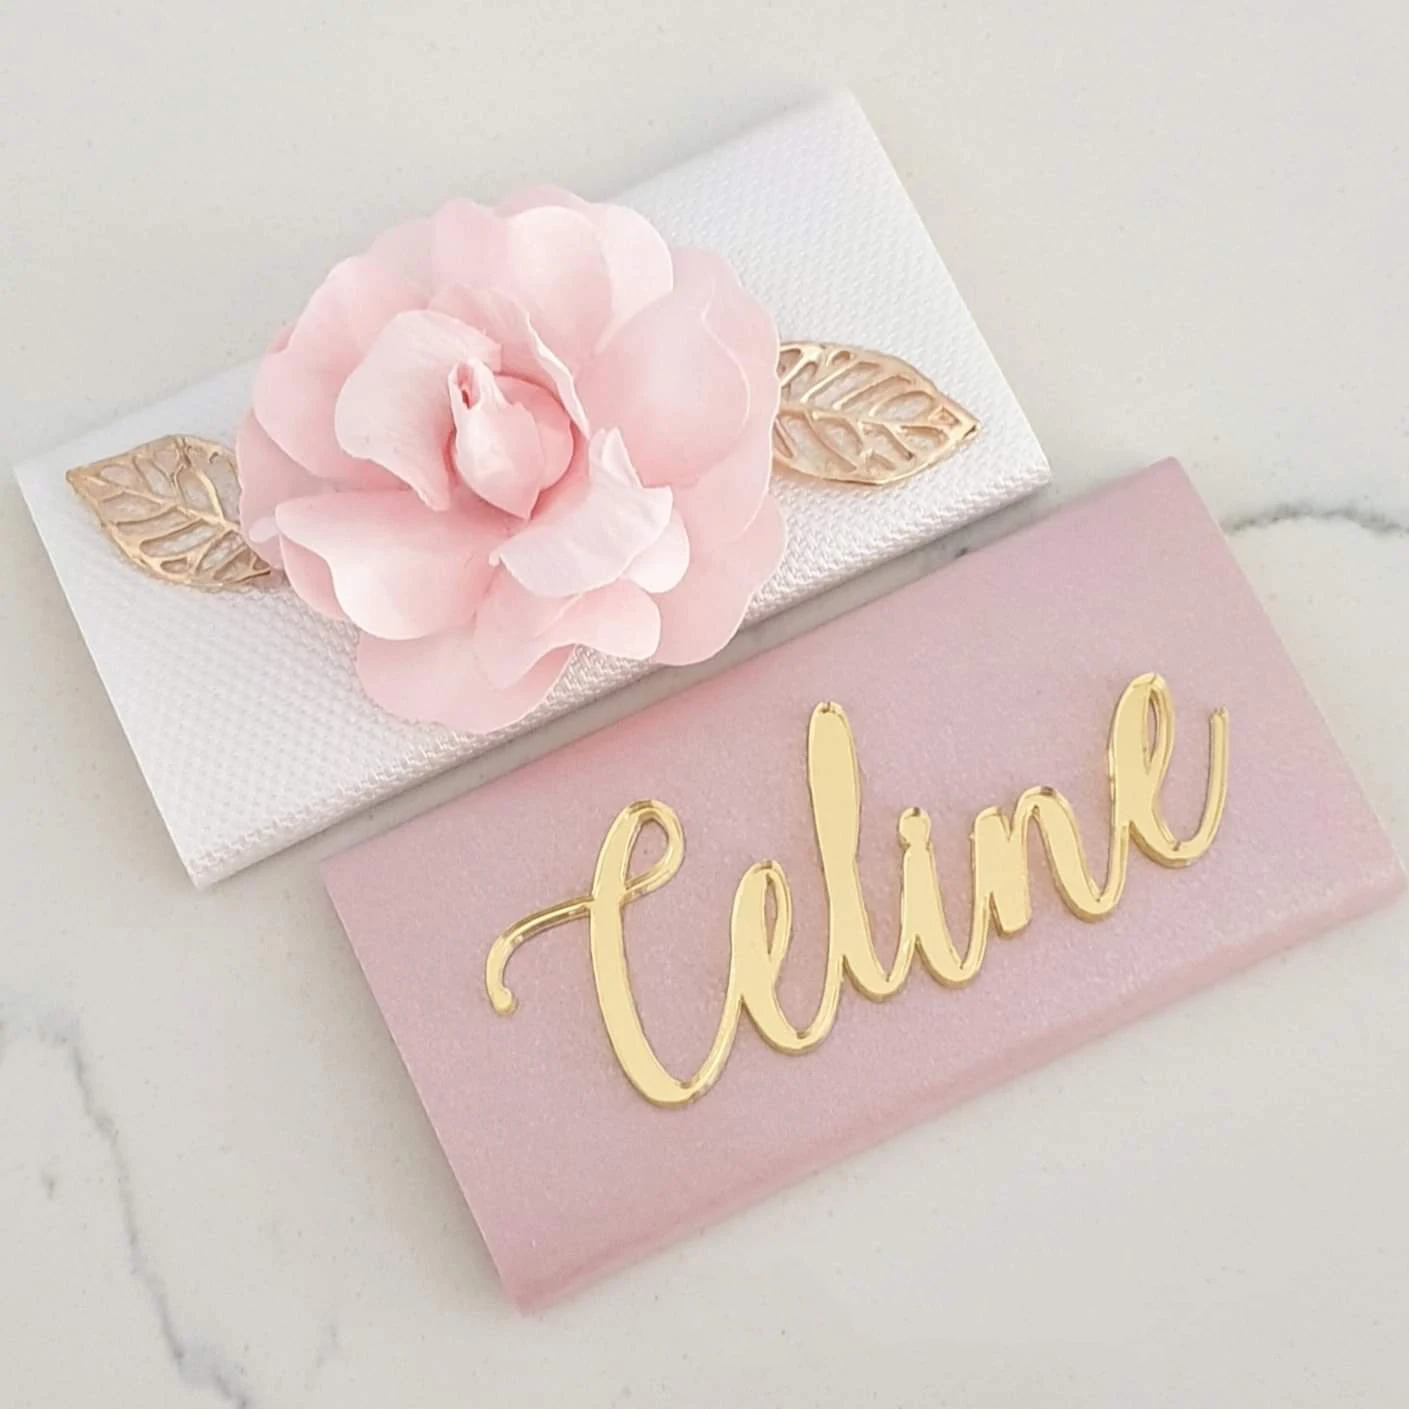 12pcs Same Personalized Laser Cut Silver / Gold Mirror Name Decor Place Card for Chocolate Bars (No Chocolate, No Wrapping Paper